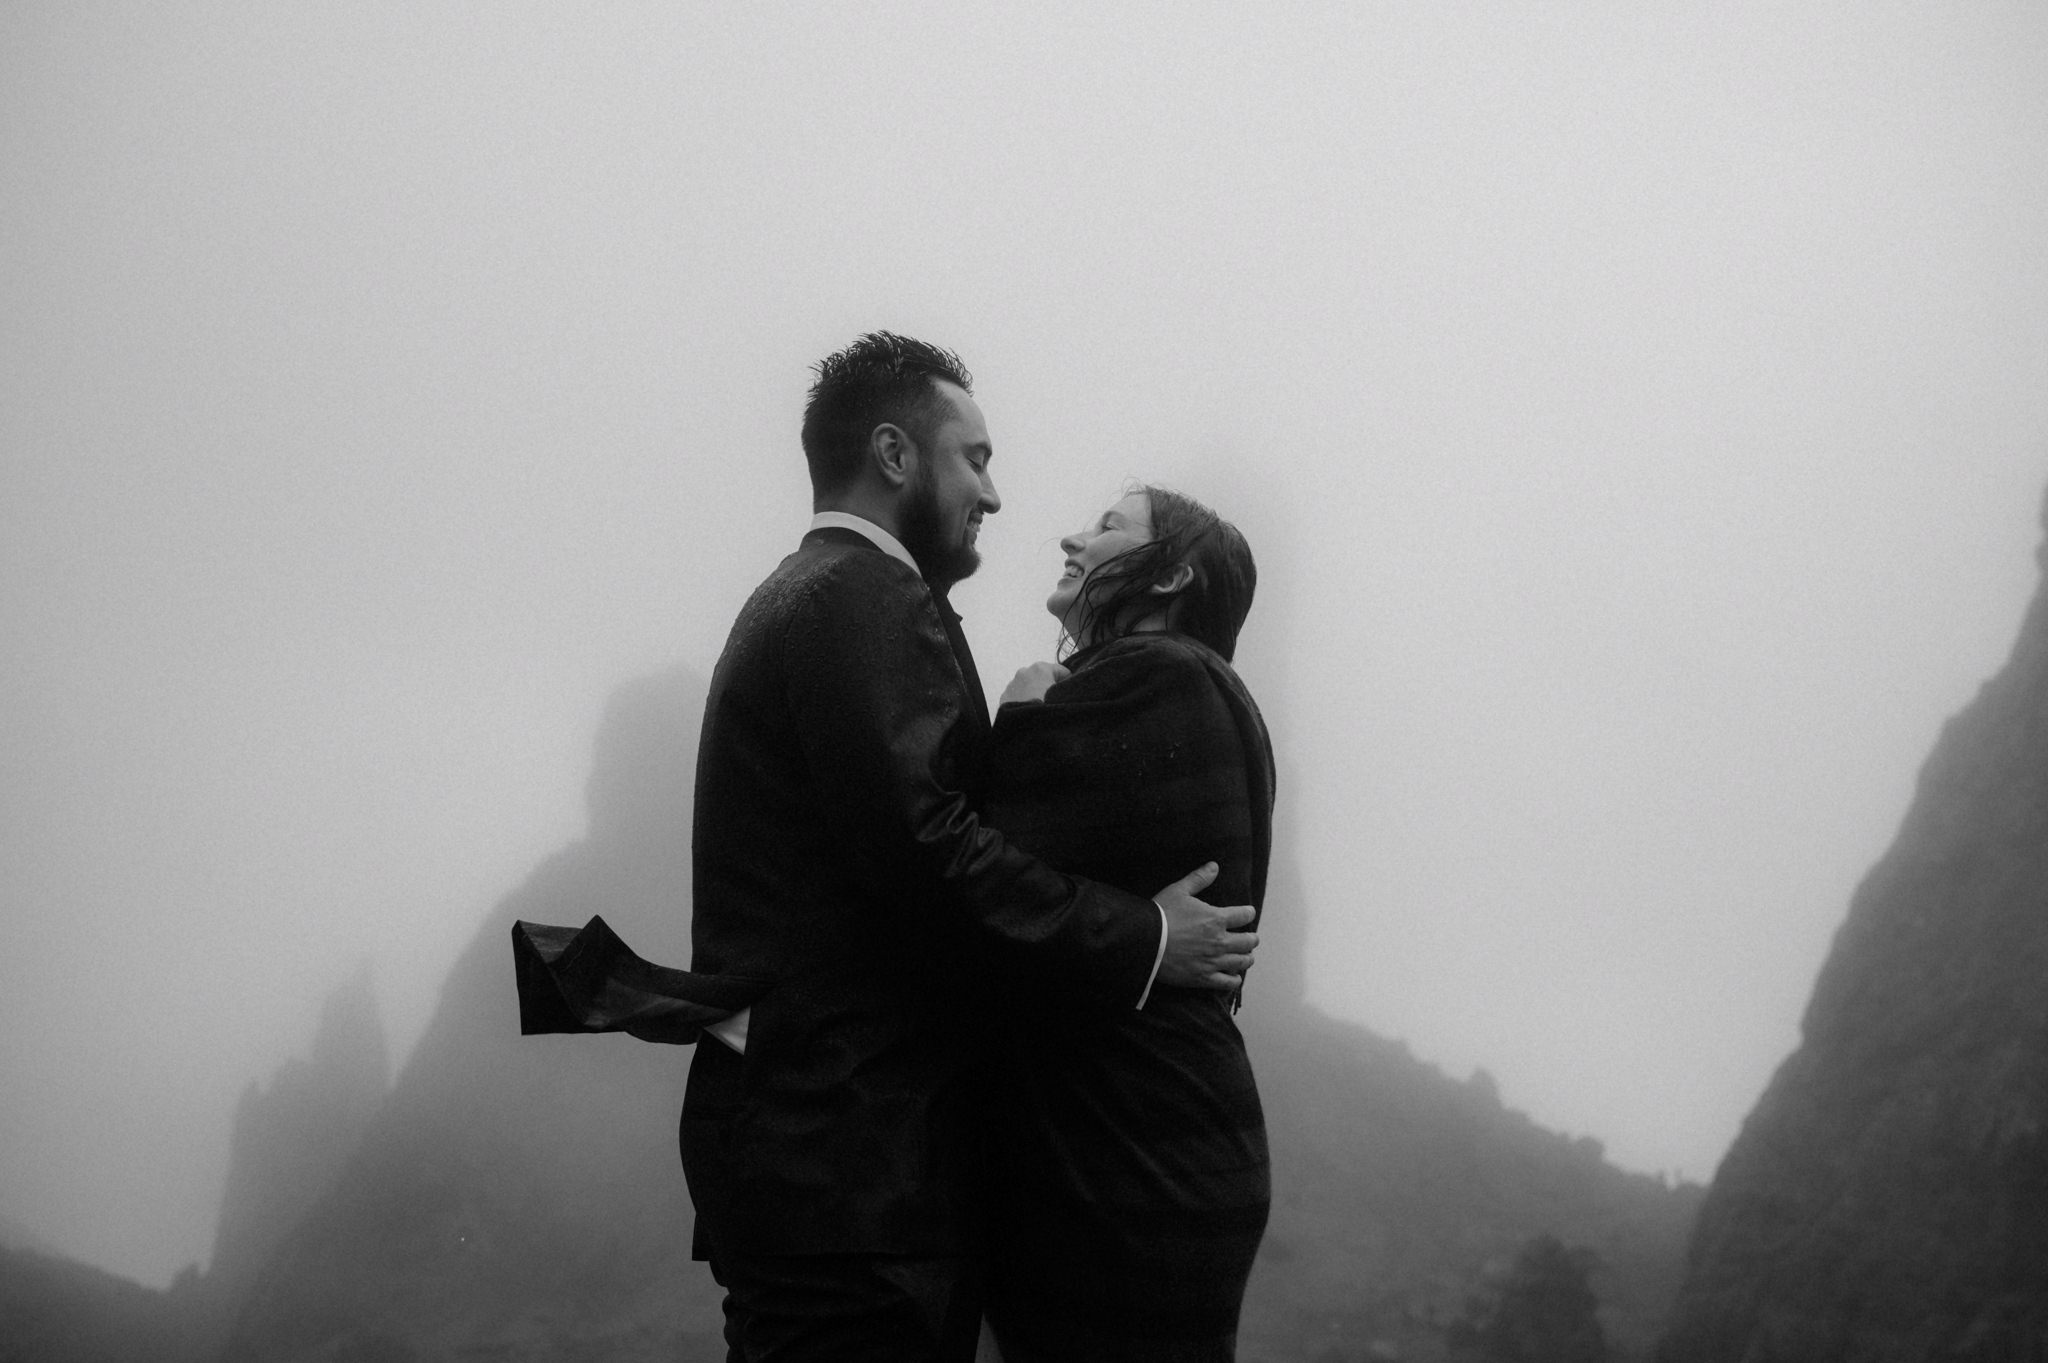 An elopement in Scotland outdoors in the rain with Bride and groom kissing near the Old man of Storr on Skye